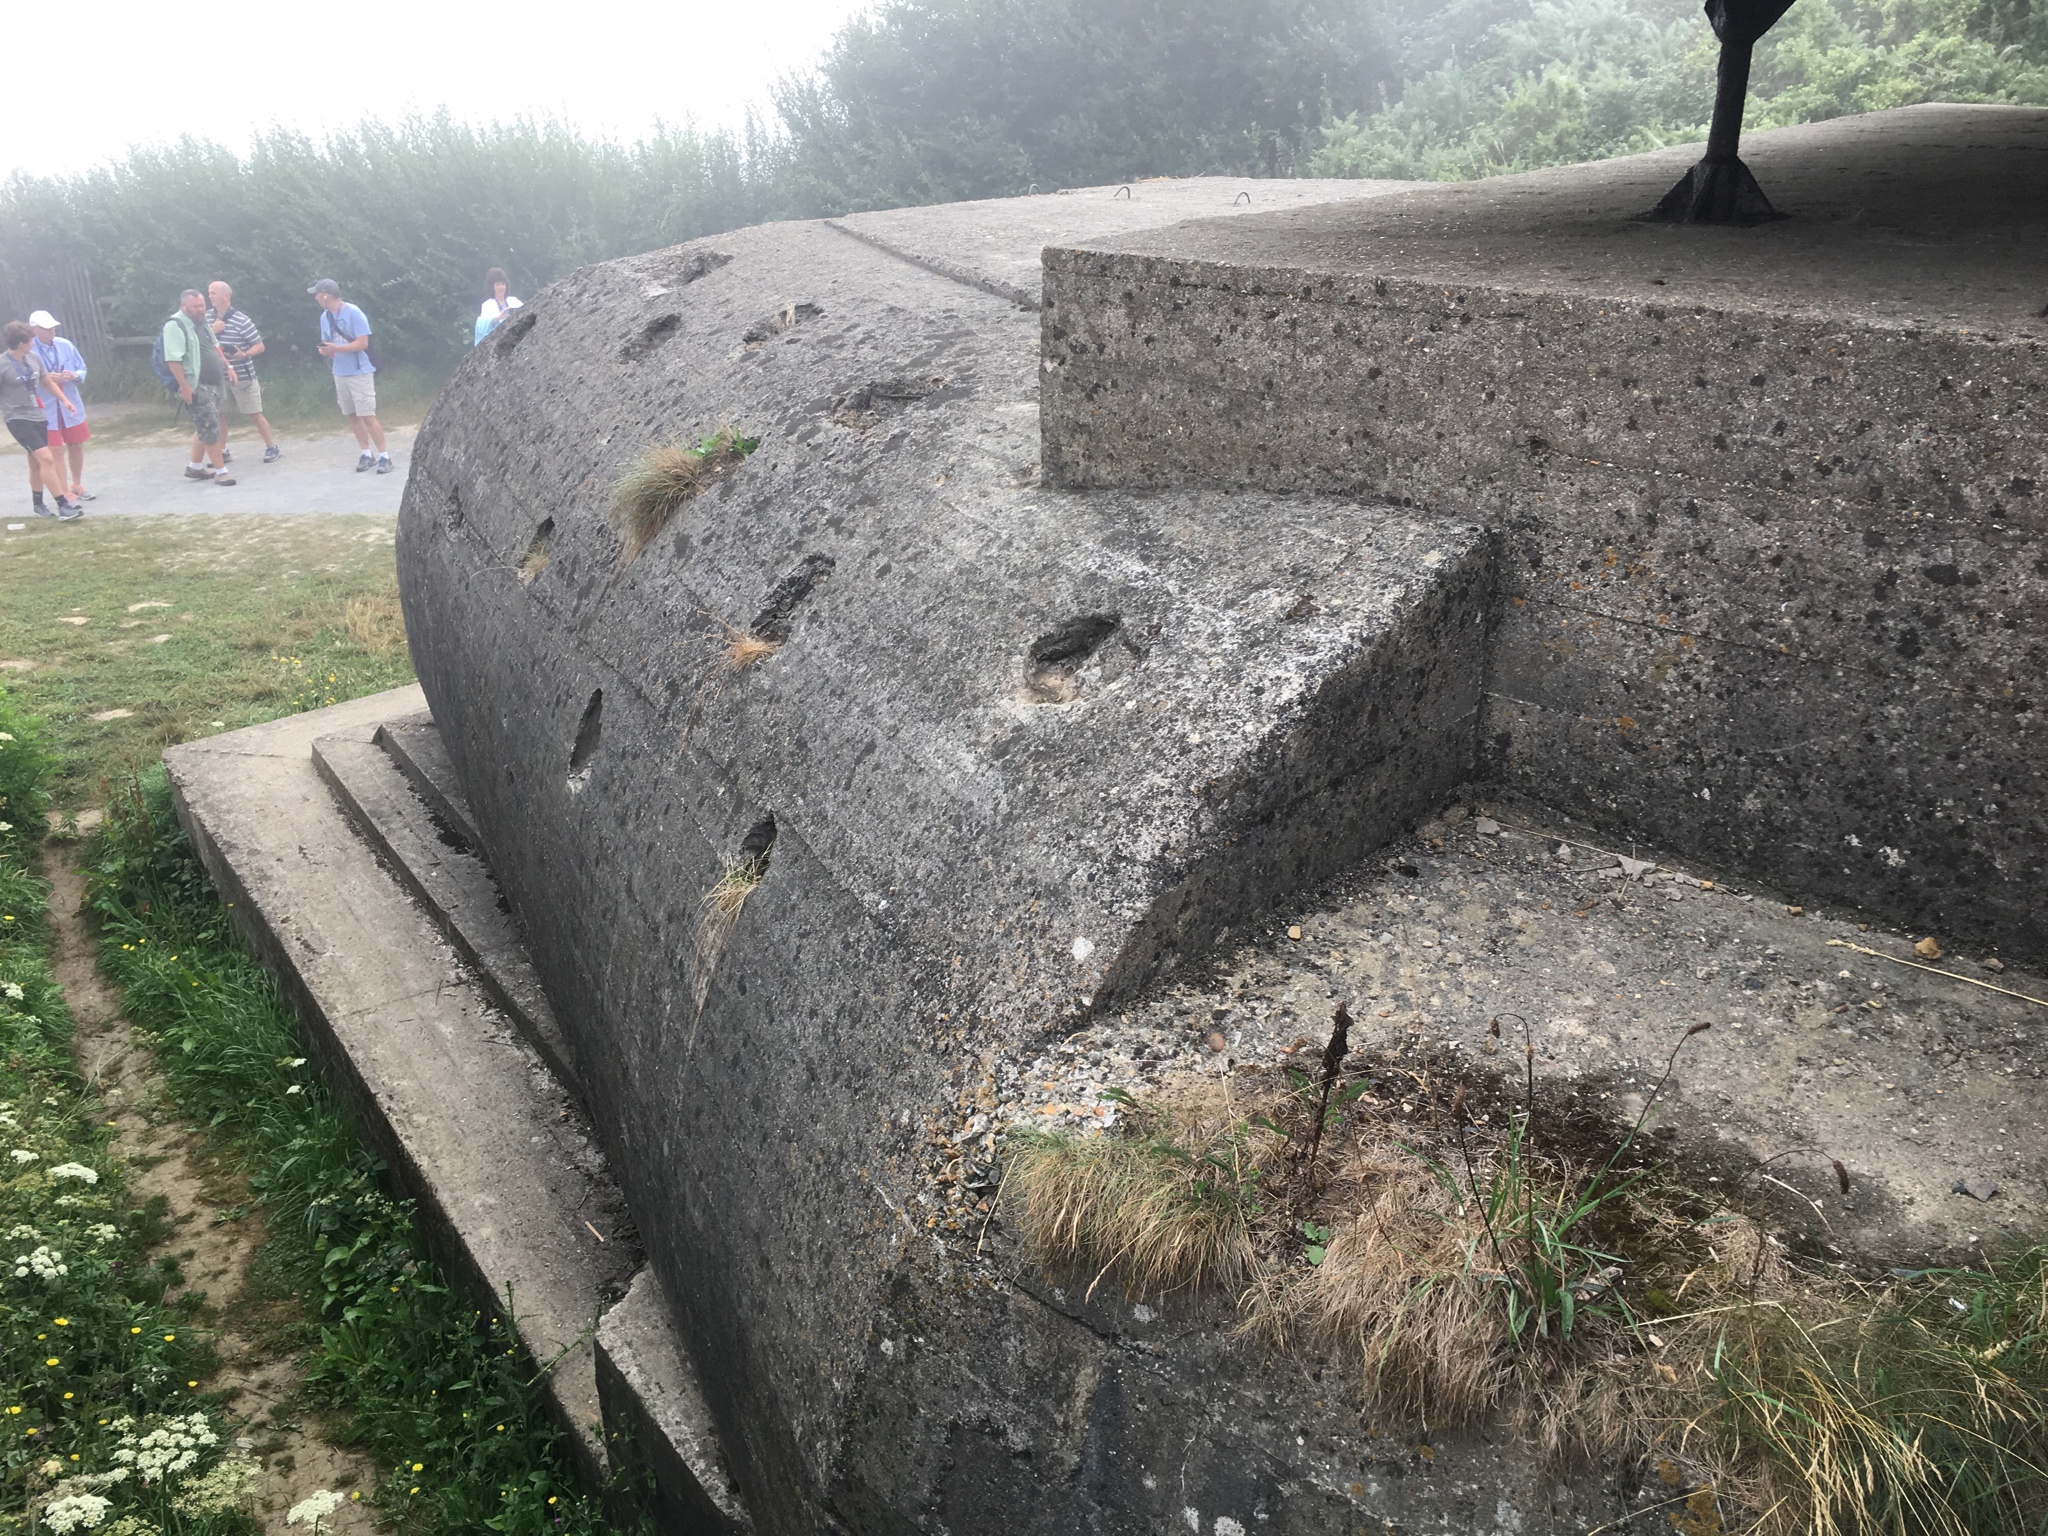 The holes in the concrete are not scars from Allied shells, they were intended for soil and natural grass to grow for camouflage of the German bunker